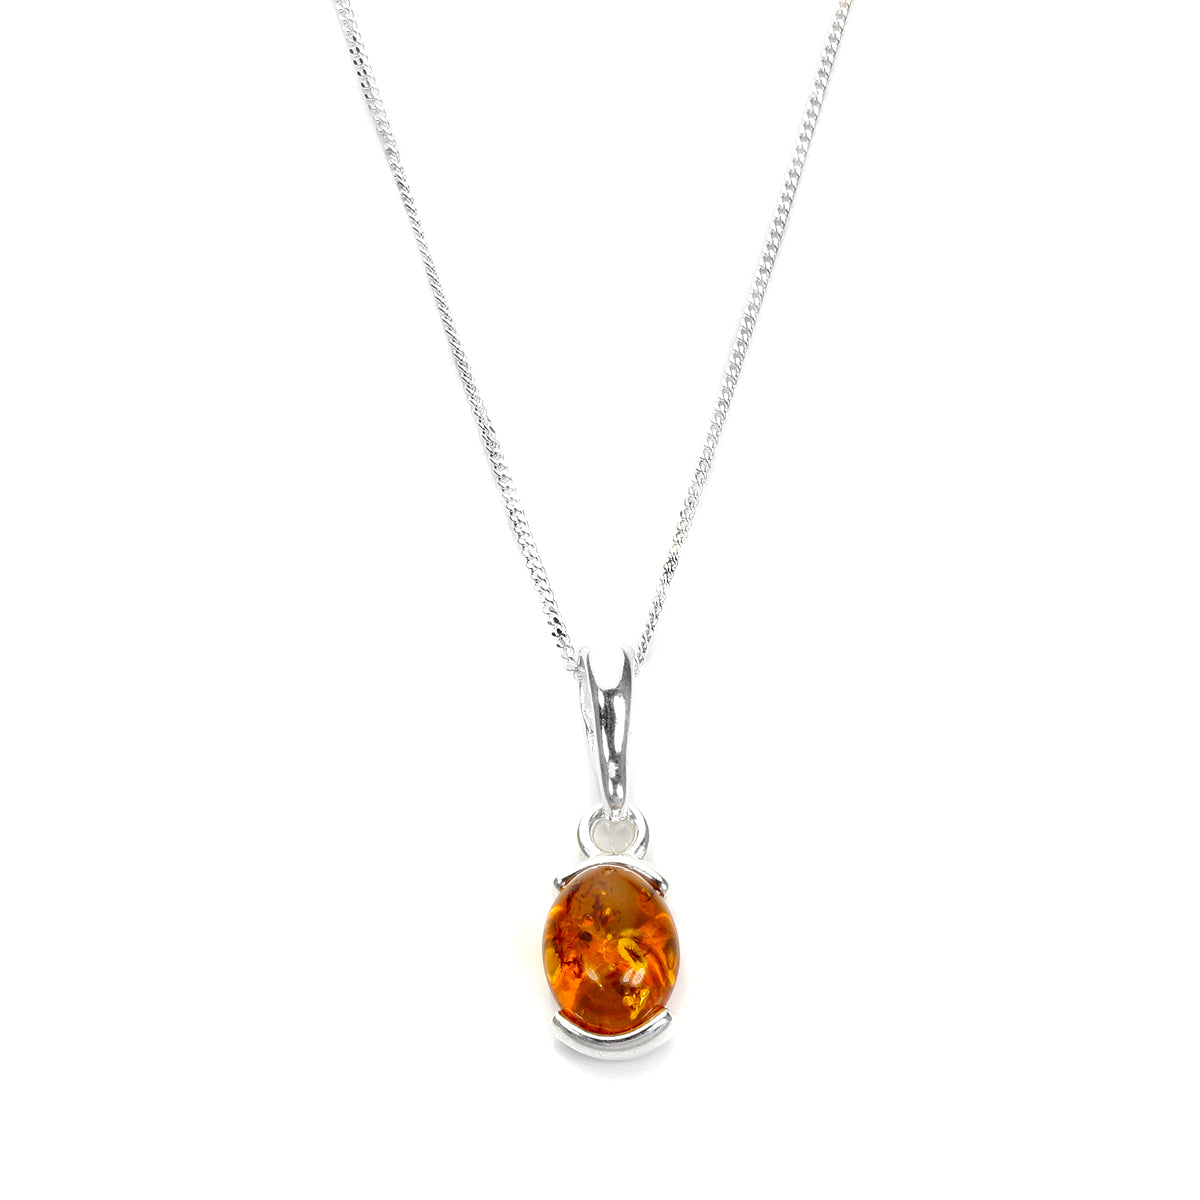 Small Sterling Silver & Baltic Amber Oval Pendant